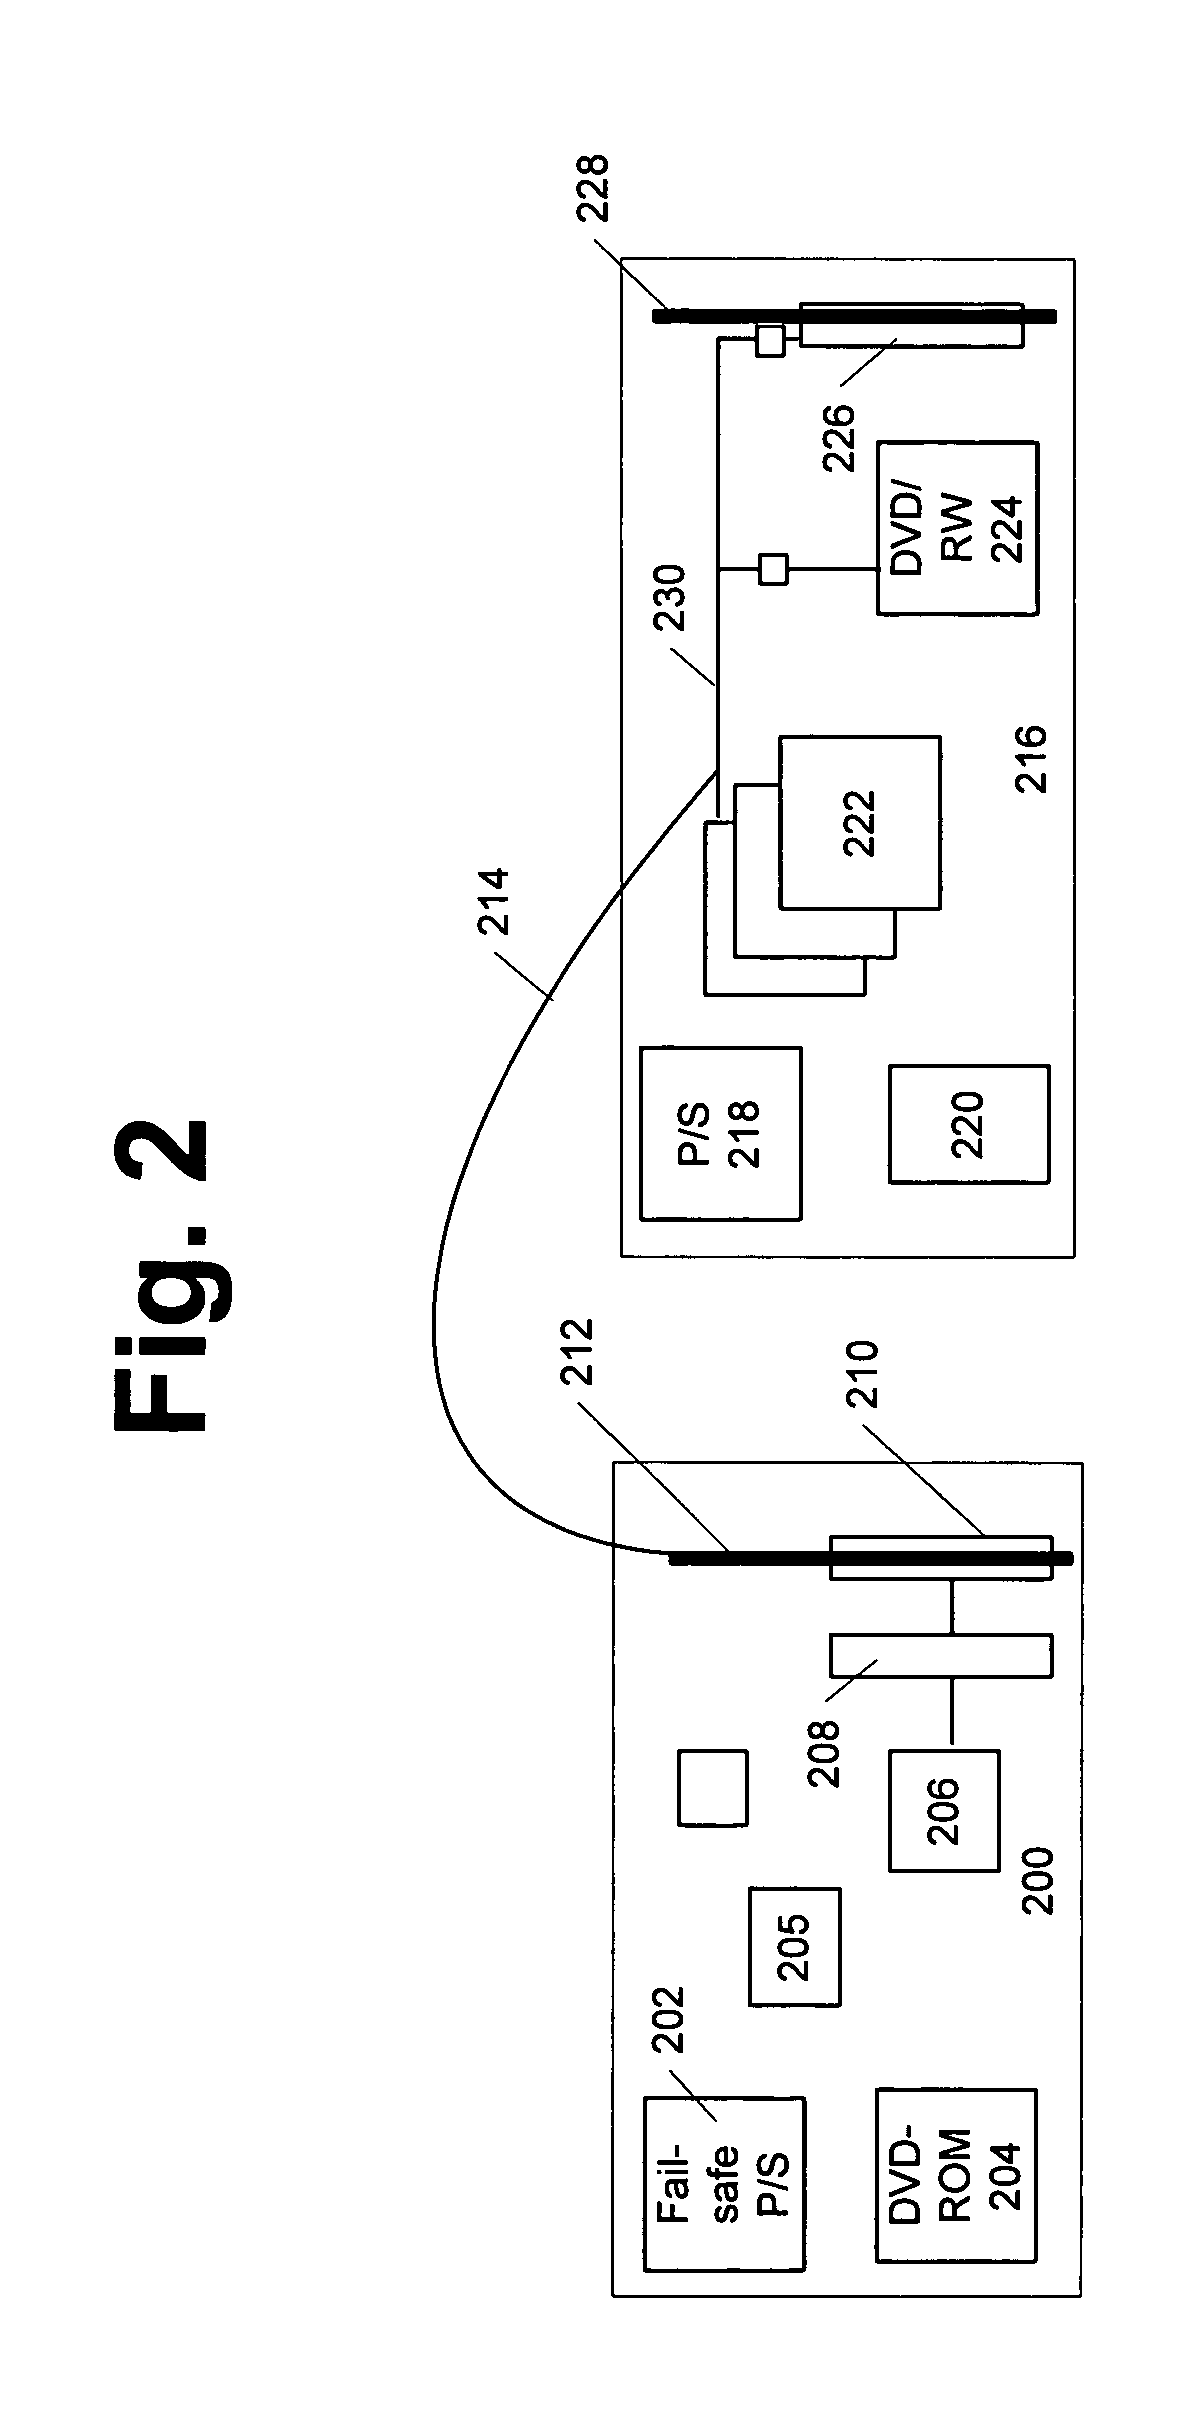 Method for expanding PC functionality while maintaining reliability and stability